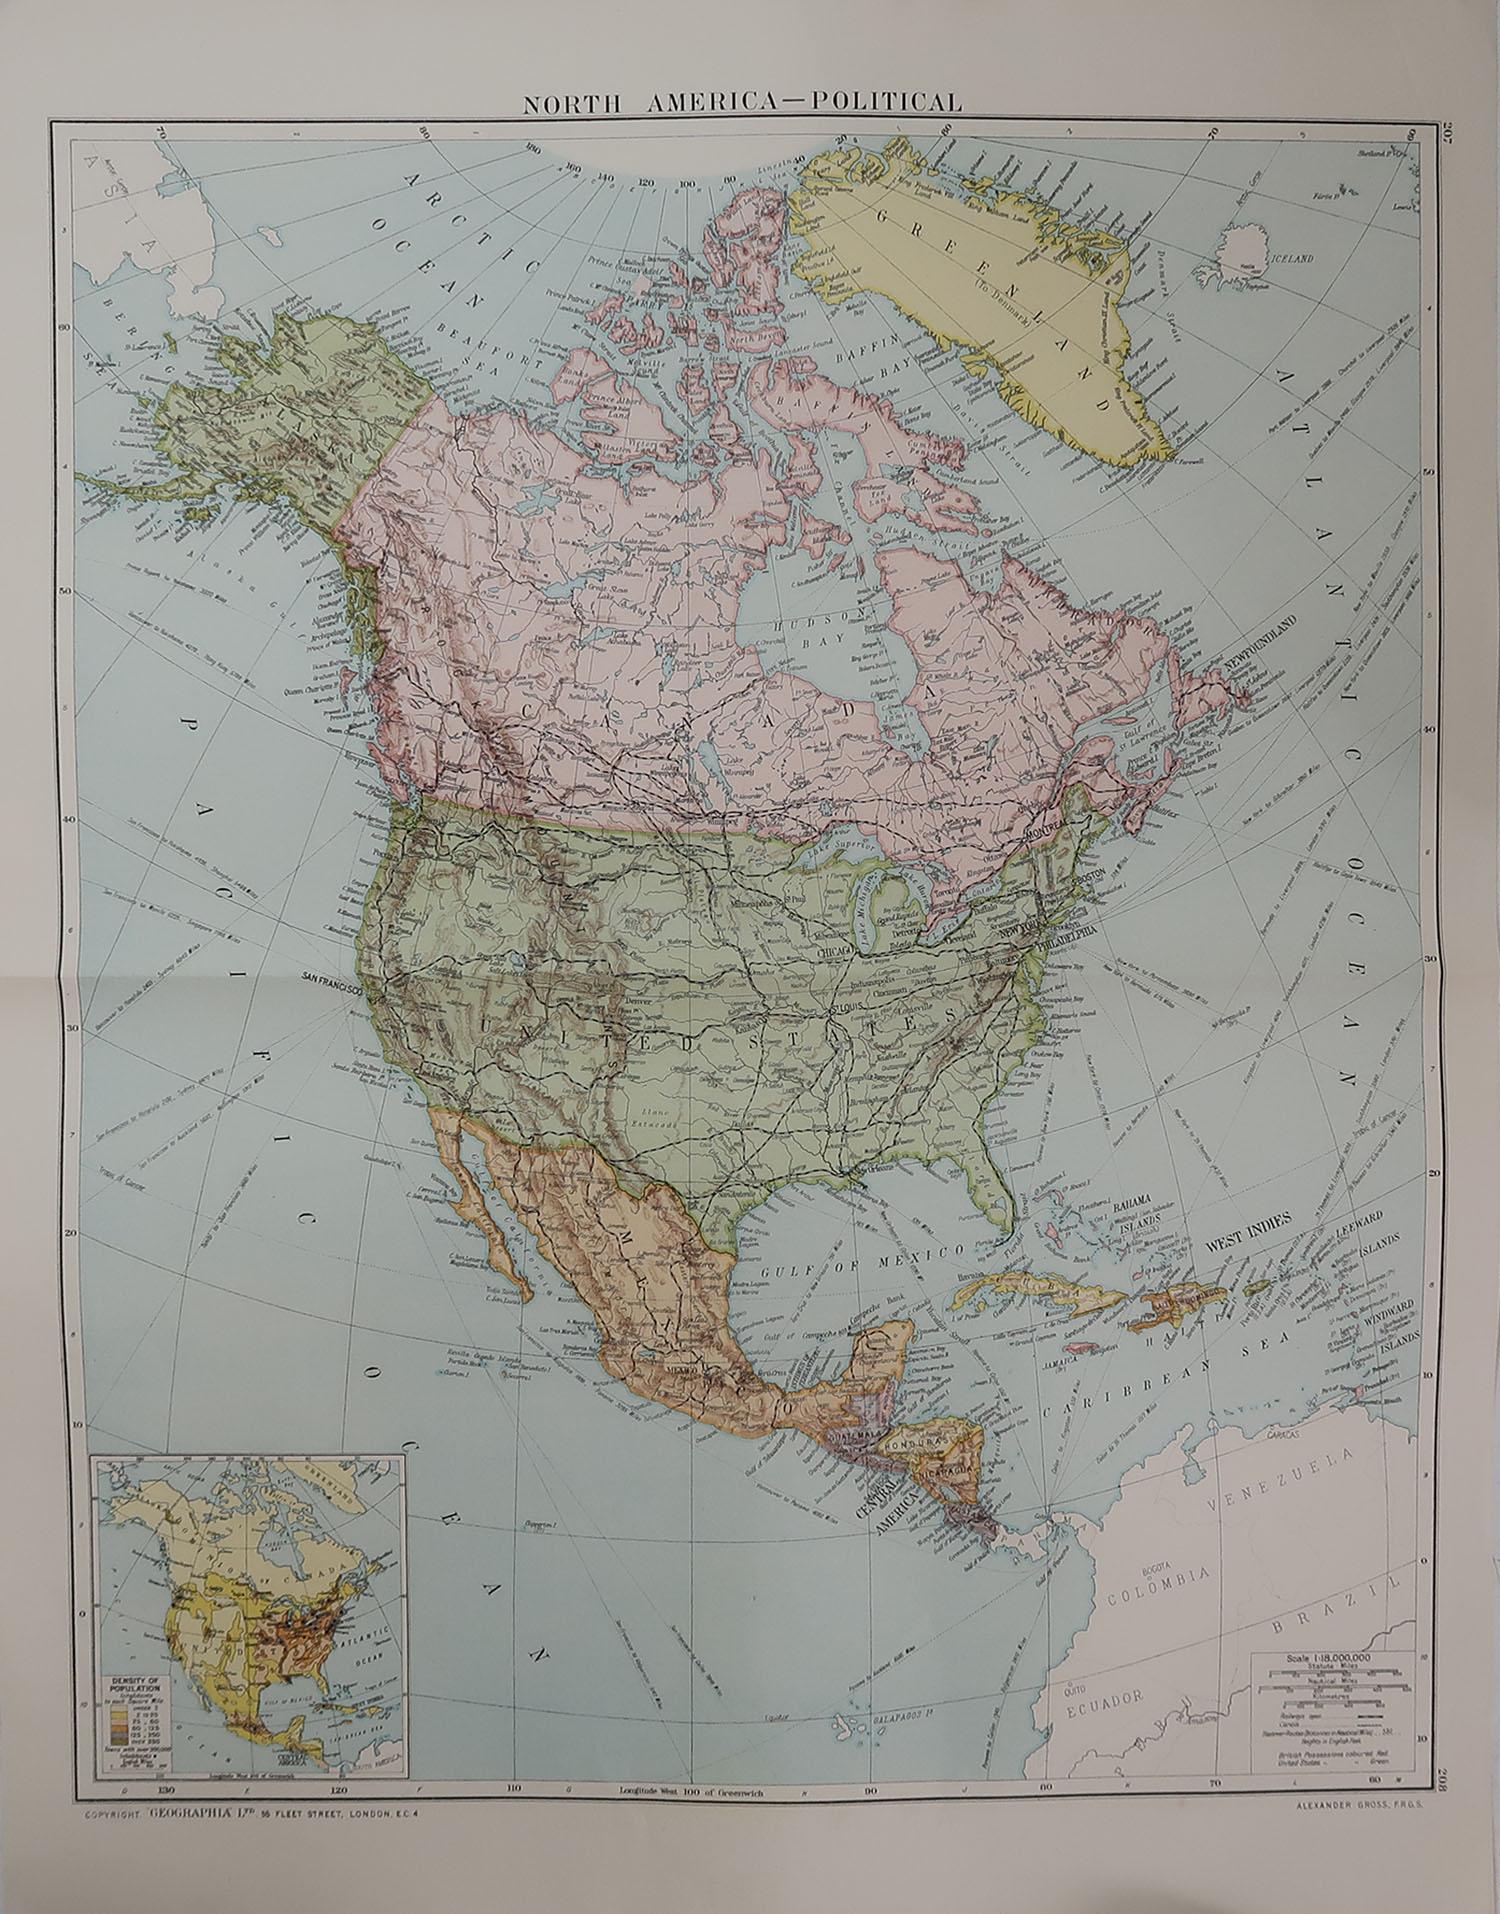 Great map of North America

Original color. Good condition

Published by Alexander Gross

Unframed.








  